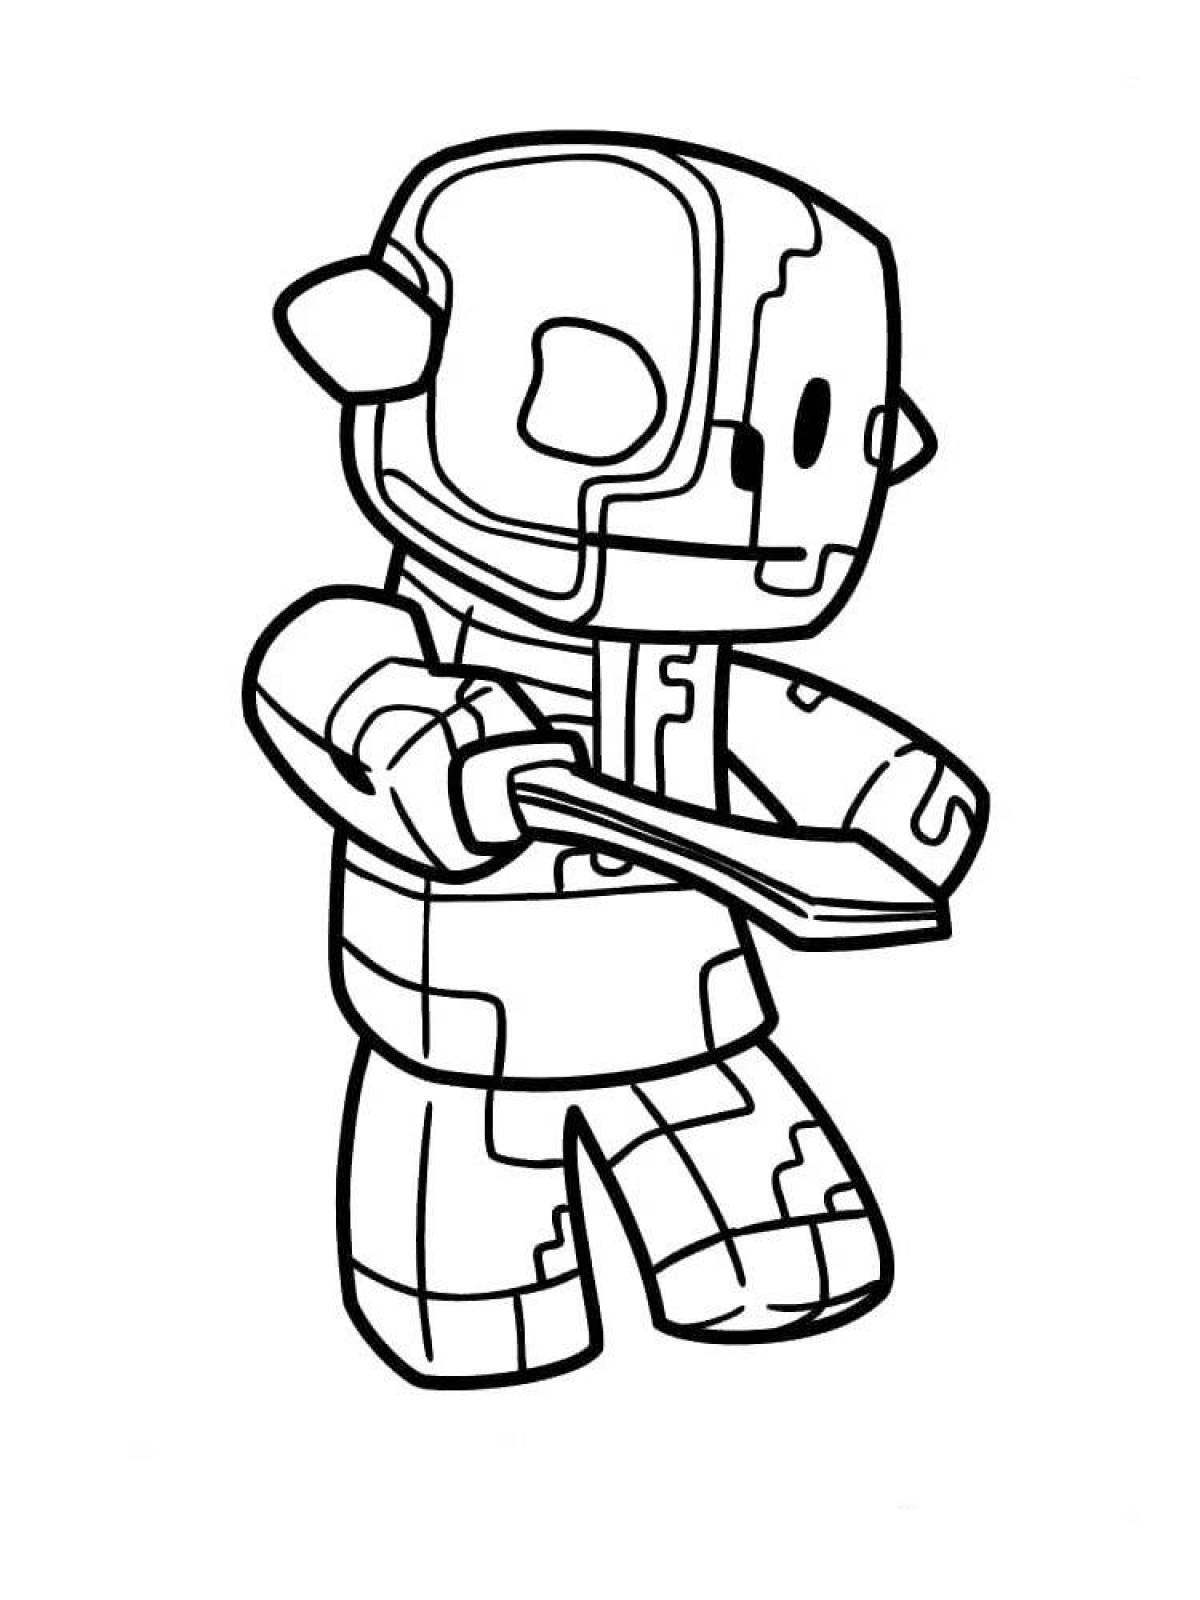 Roblox glowing doors coloring page